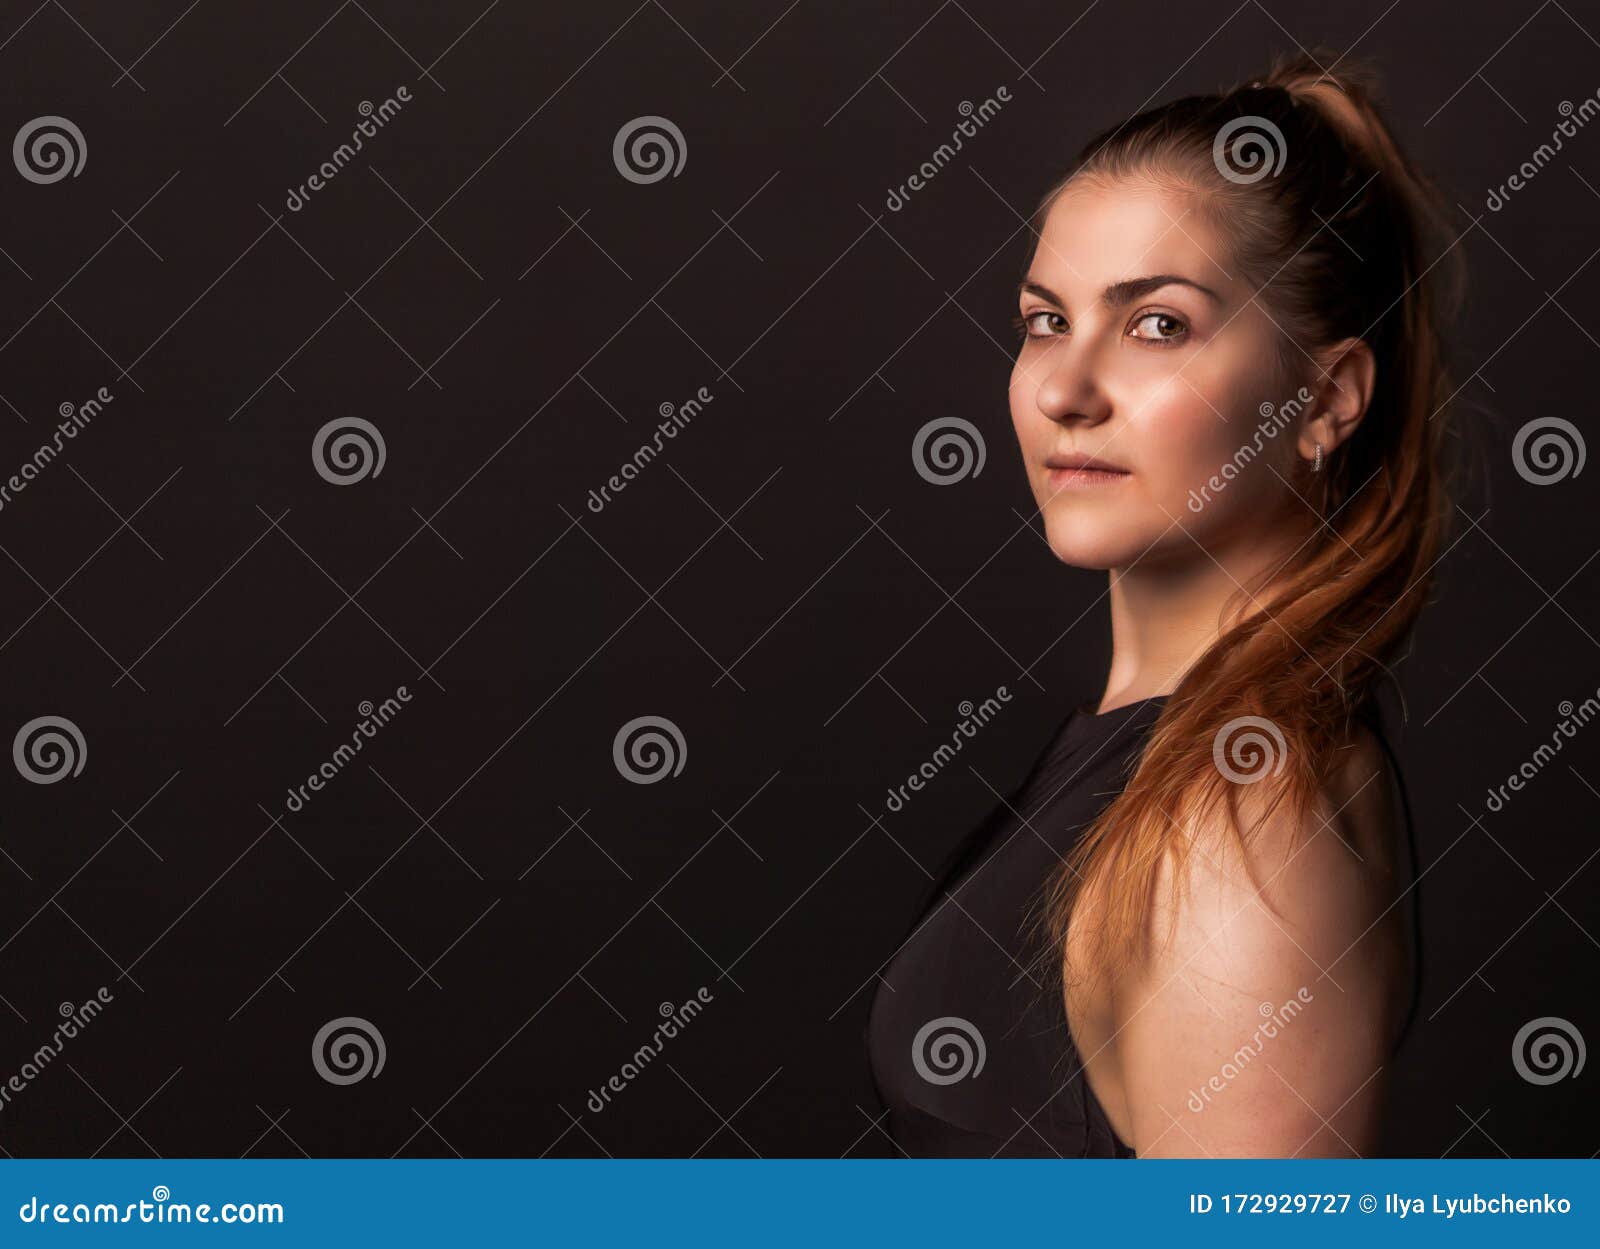 Girl on a Black Background with a Brown Hair Looks at Sex Trafficking Beautiful Stock Image